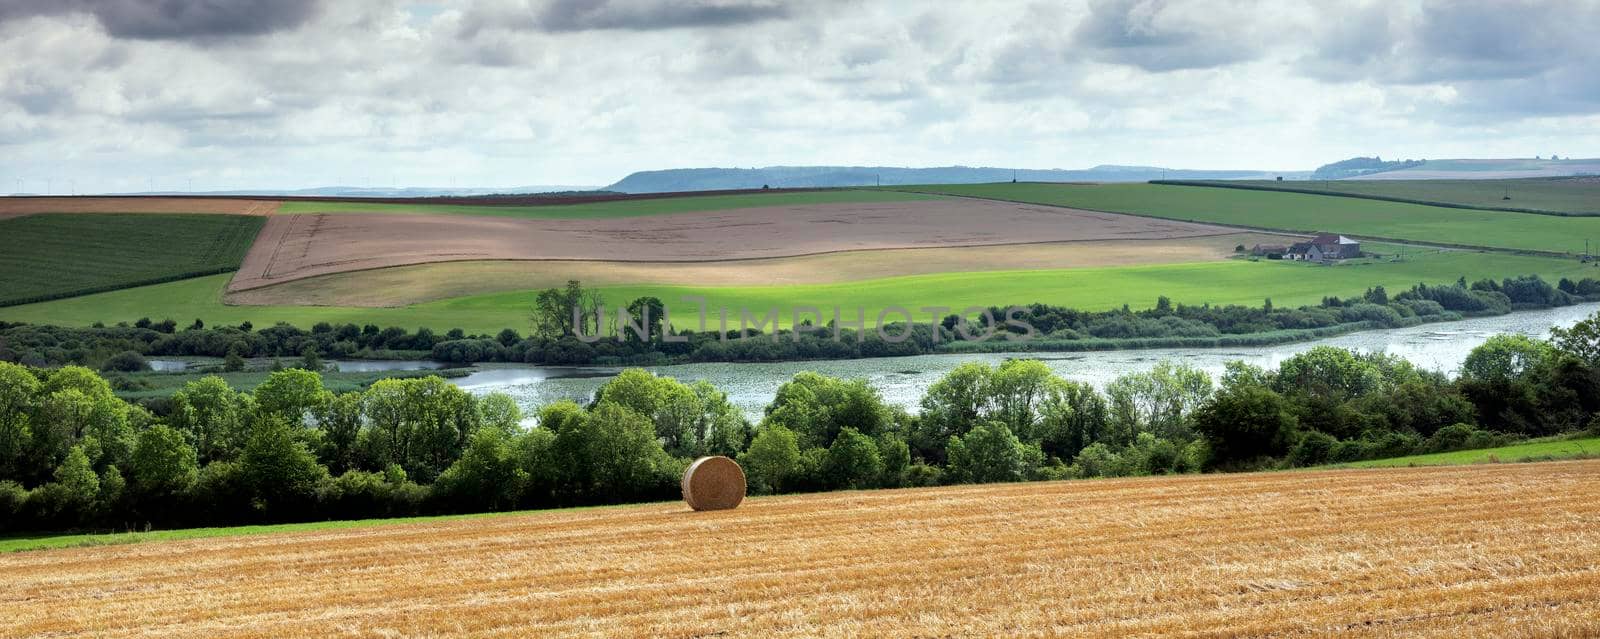 lac de bairon in countryside of northern france under cloudy sky by ahavelaar